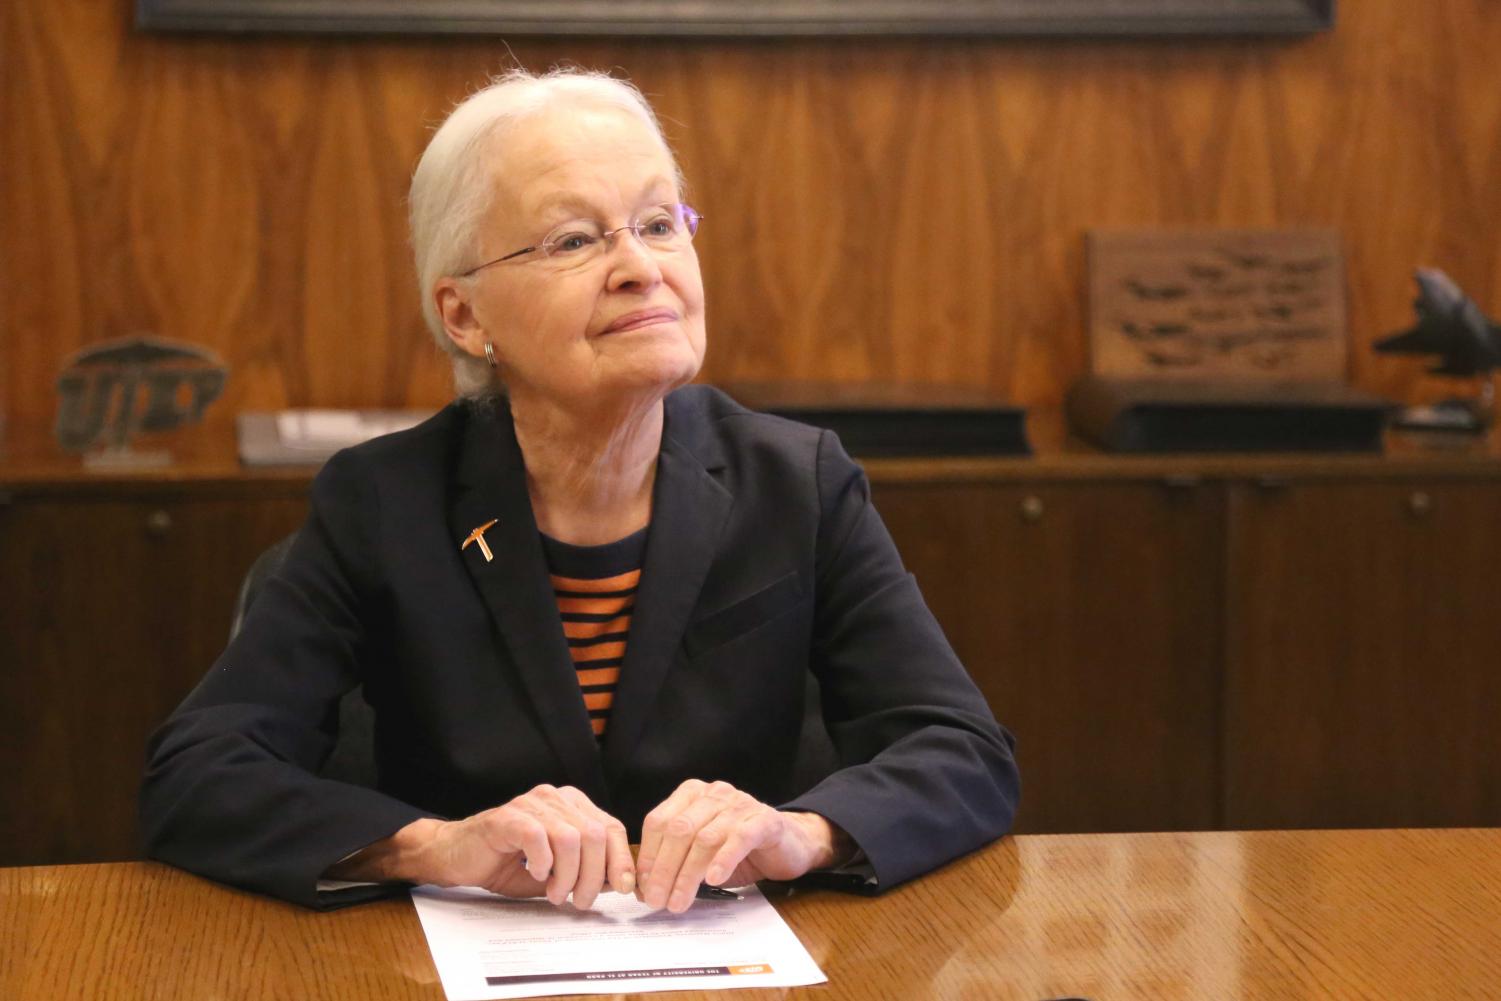 UTEP+President+speaks+about+retirement+plans+and+her+hopes+for+UTEPs+future